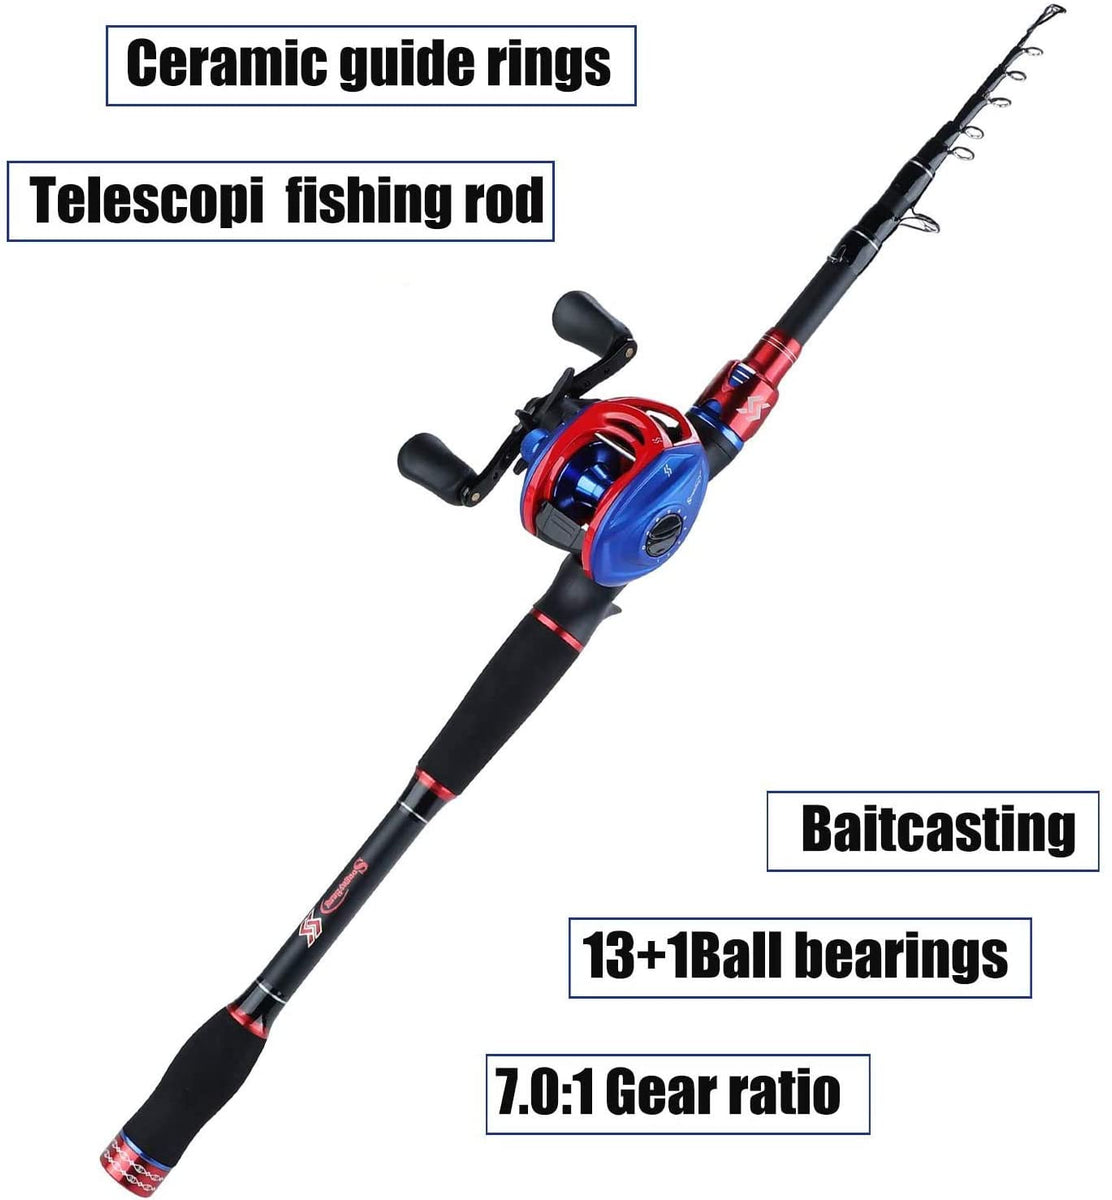 Sougayilang Fishing Rod and Reel Combo, Ultra Light Baitcasting Fishing  Reel for Travel Saltwater Freshwater and Beginner